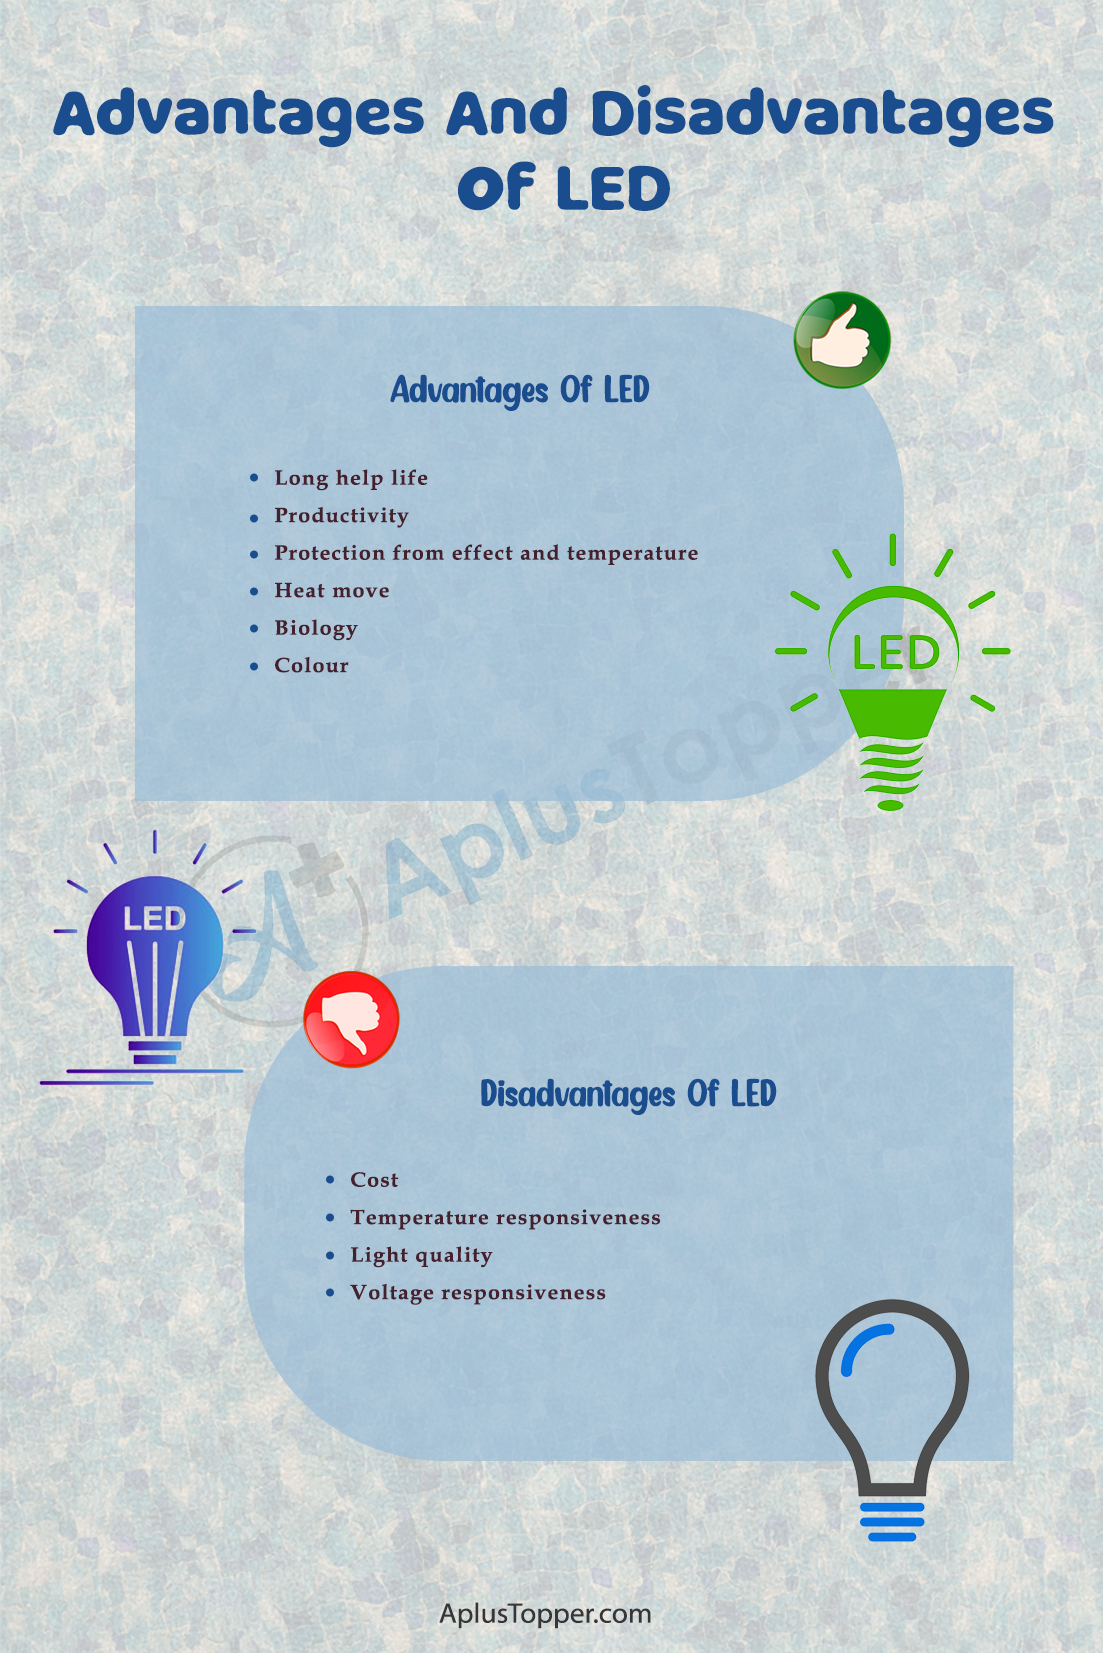 What is the disadvantage for LED?